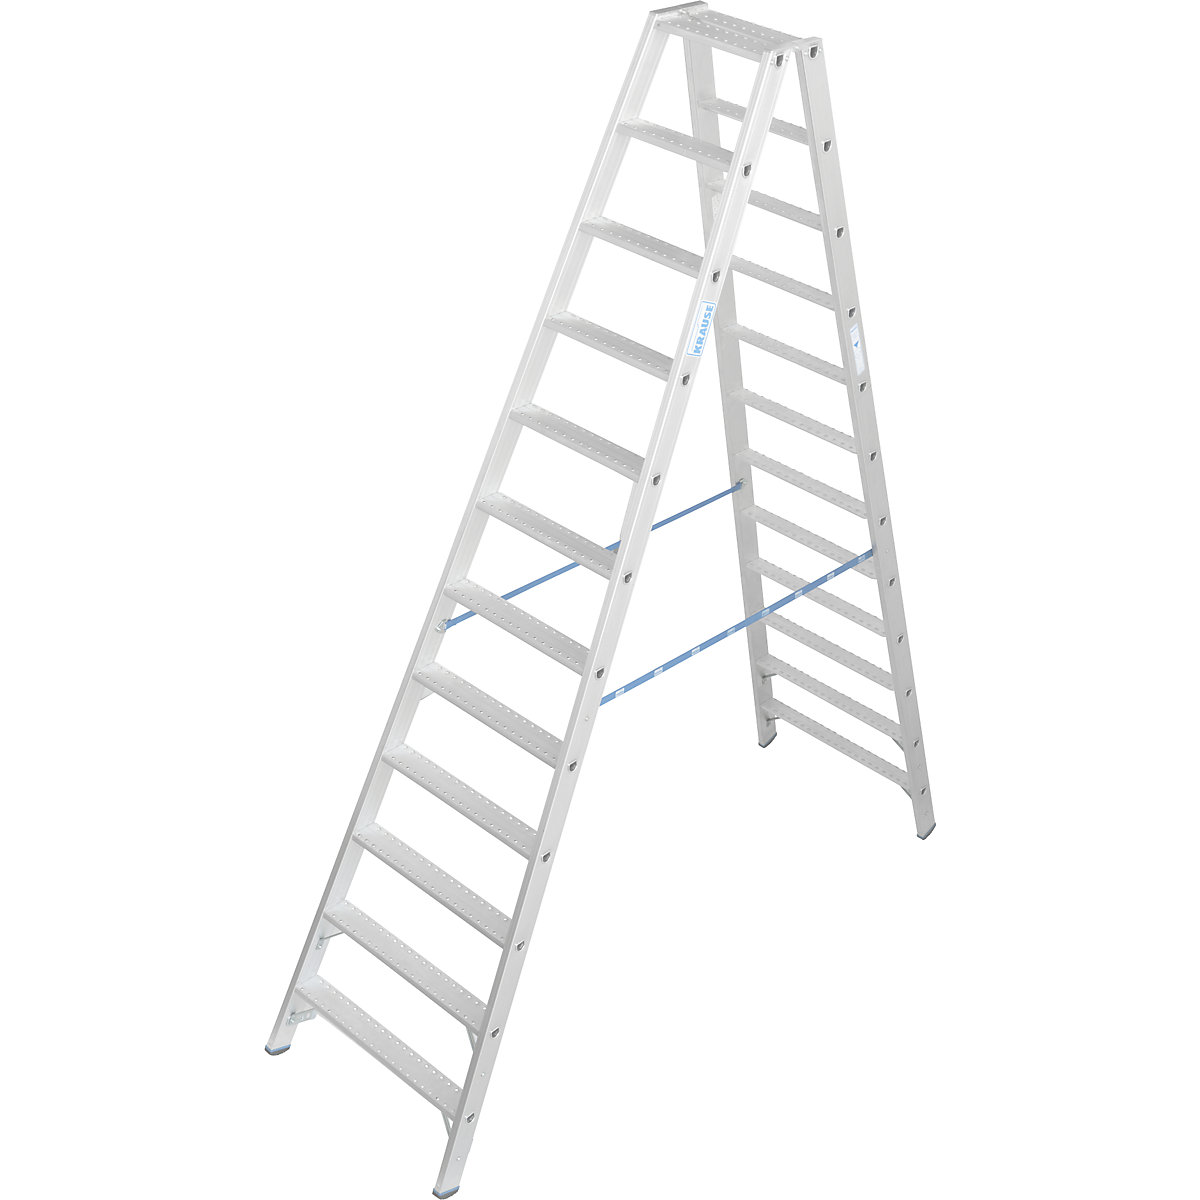 Aluminium stepladder, with R13 anti-slip properties – KRAUSE, double sided access, 2x12 steps-2